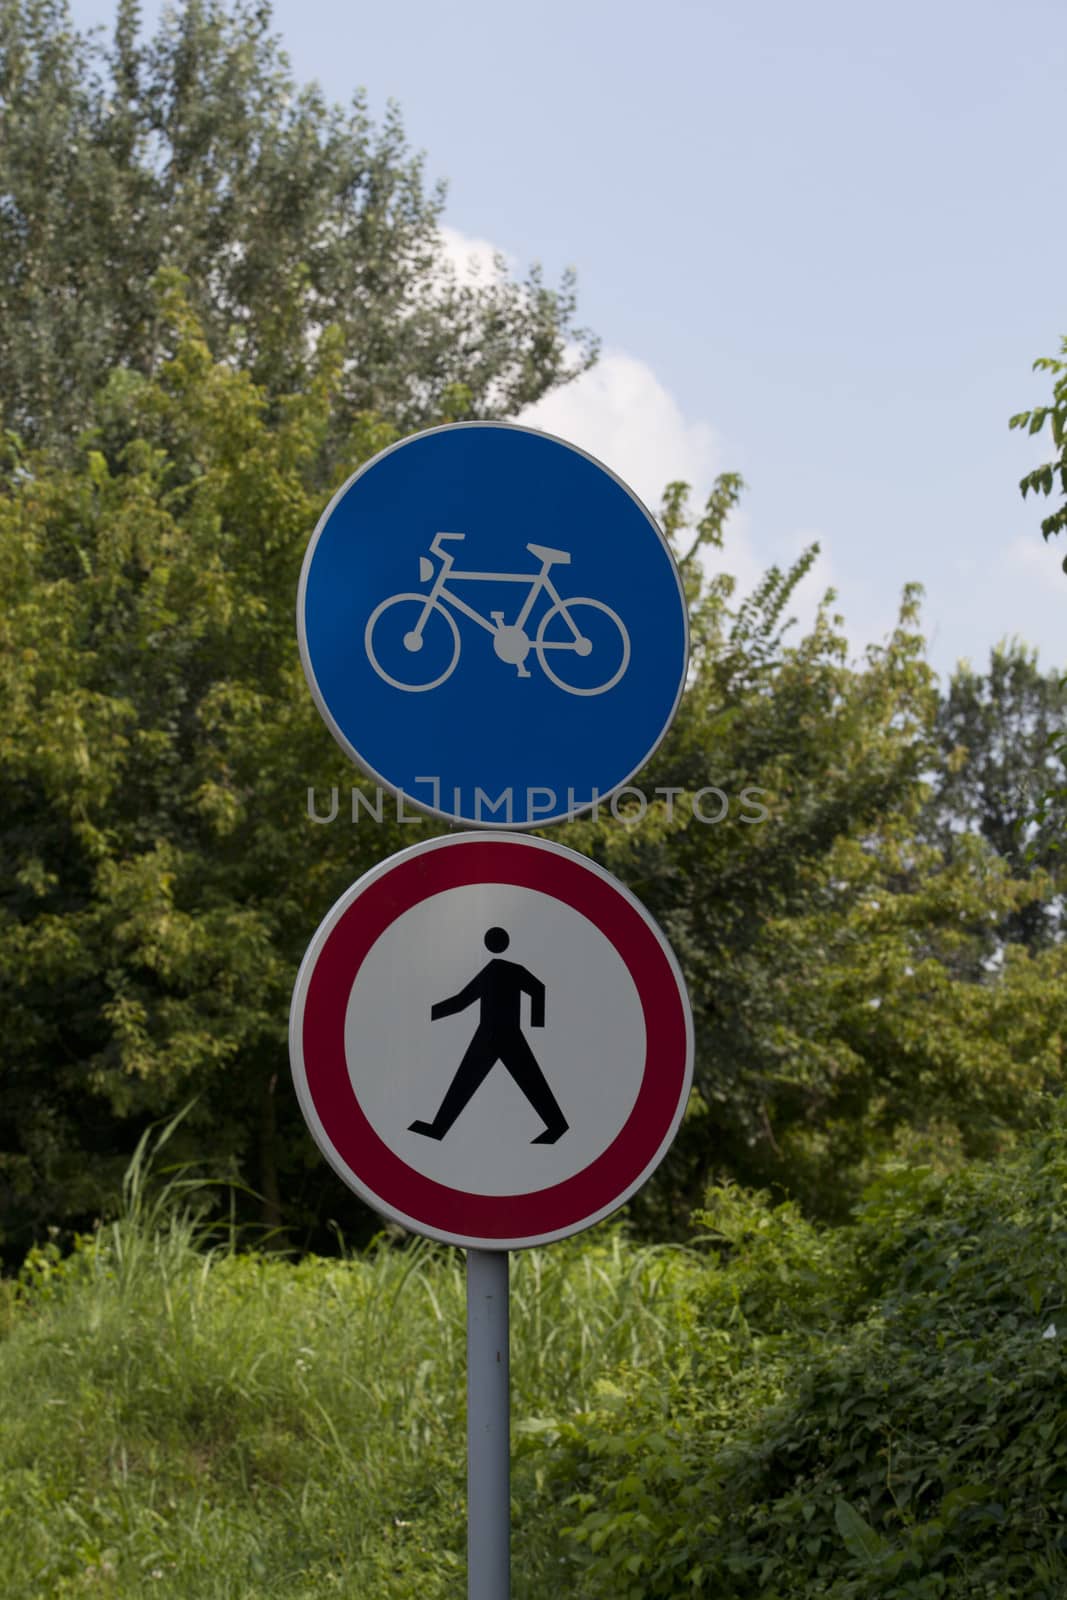 Bicycle path by wellphoto